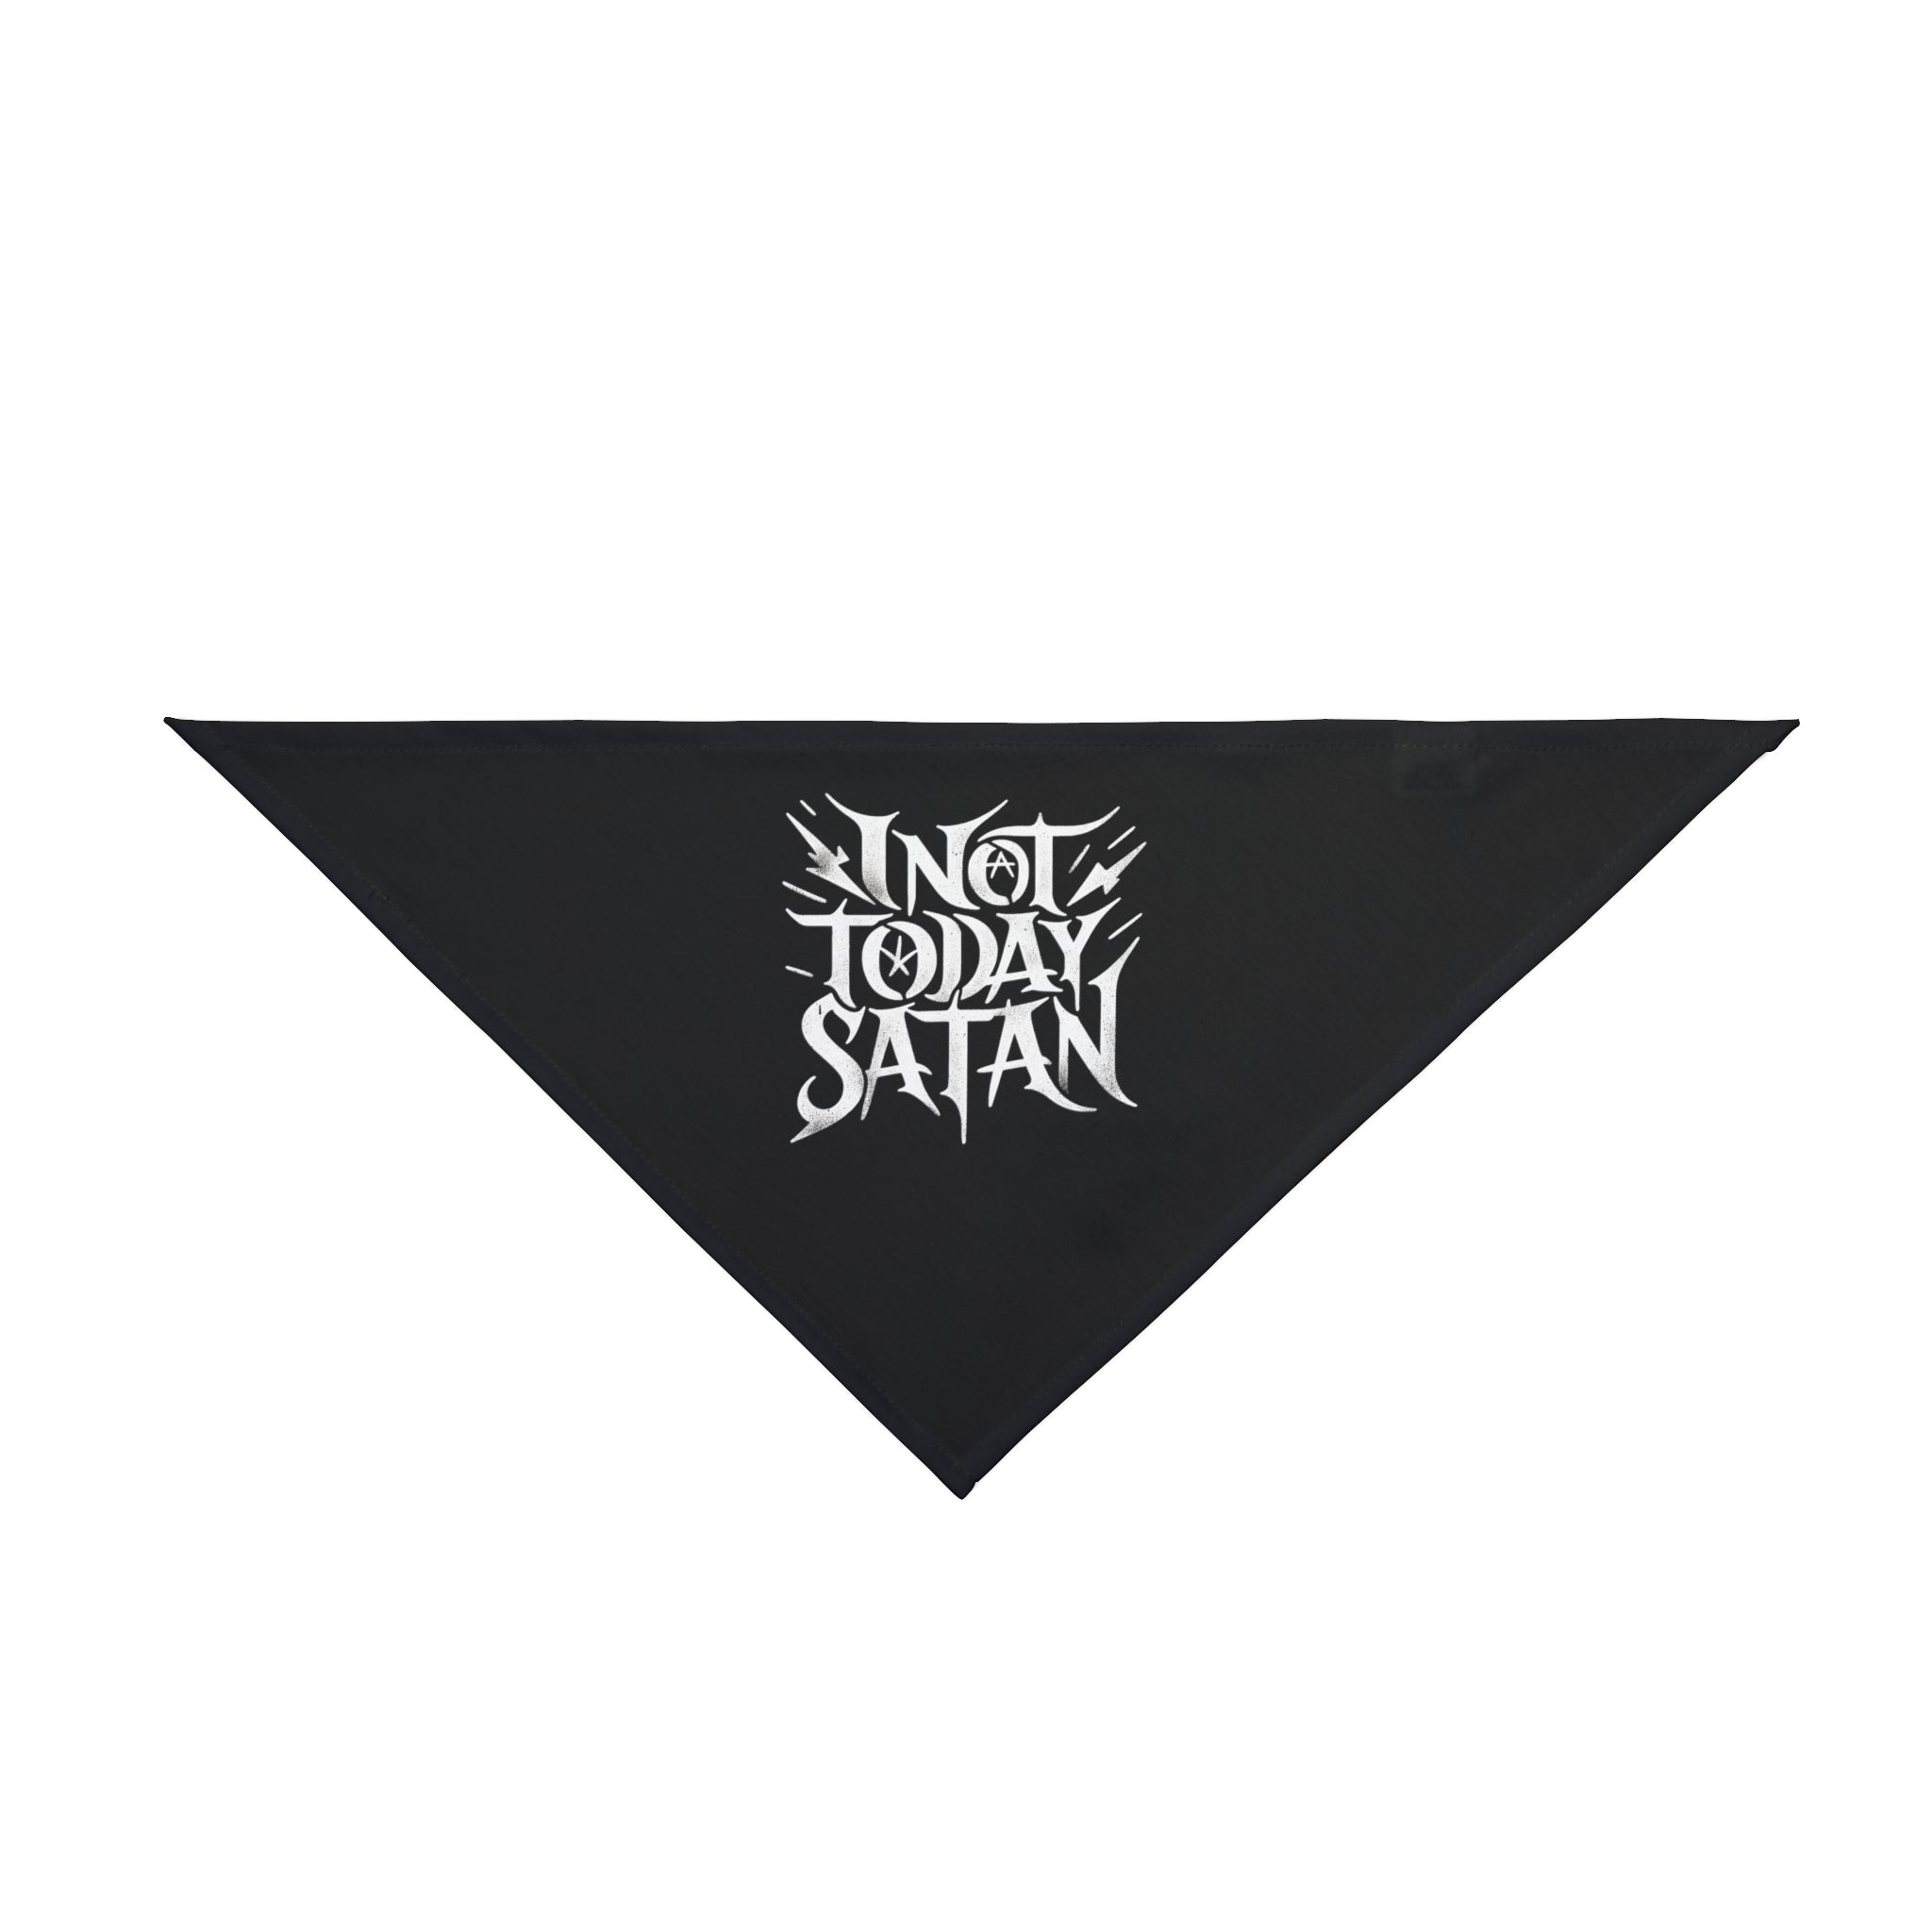 A Not Today Satan - Pet Bandana with the phrase "Not Today Satan" written in bold, white stylized text in the center.